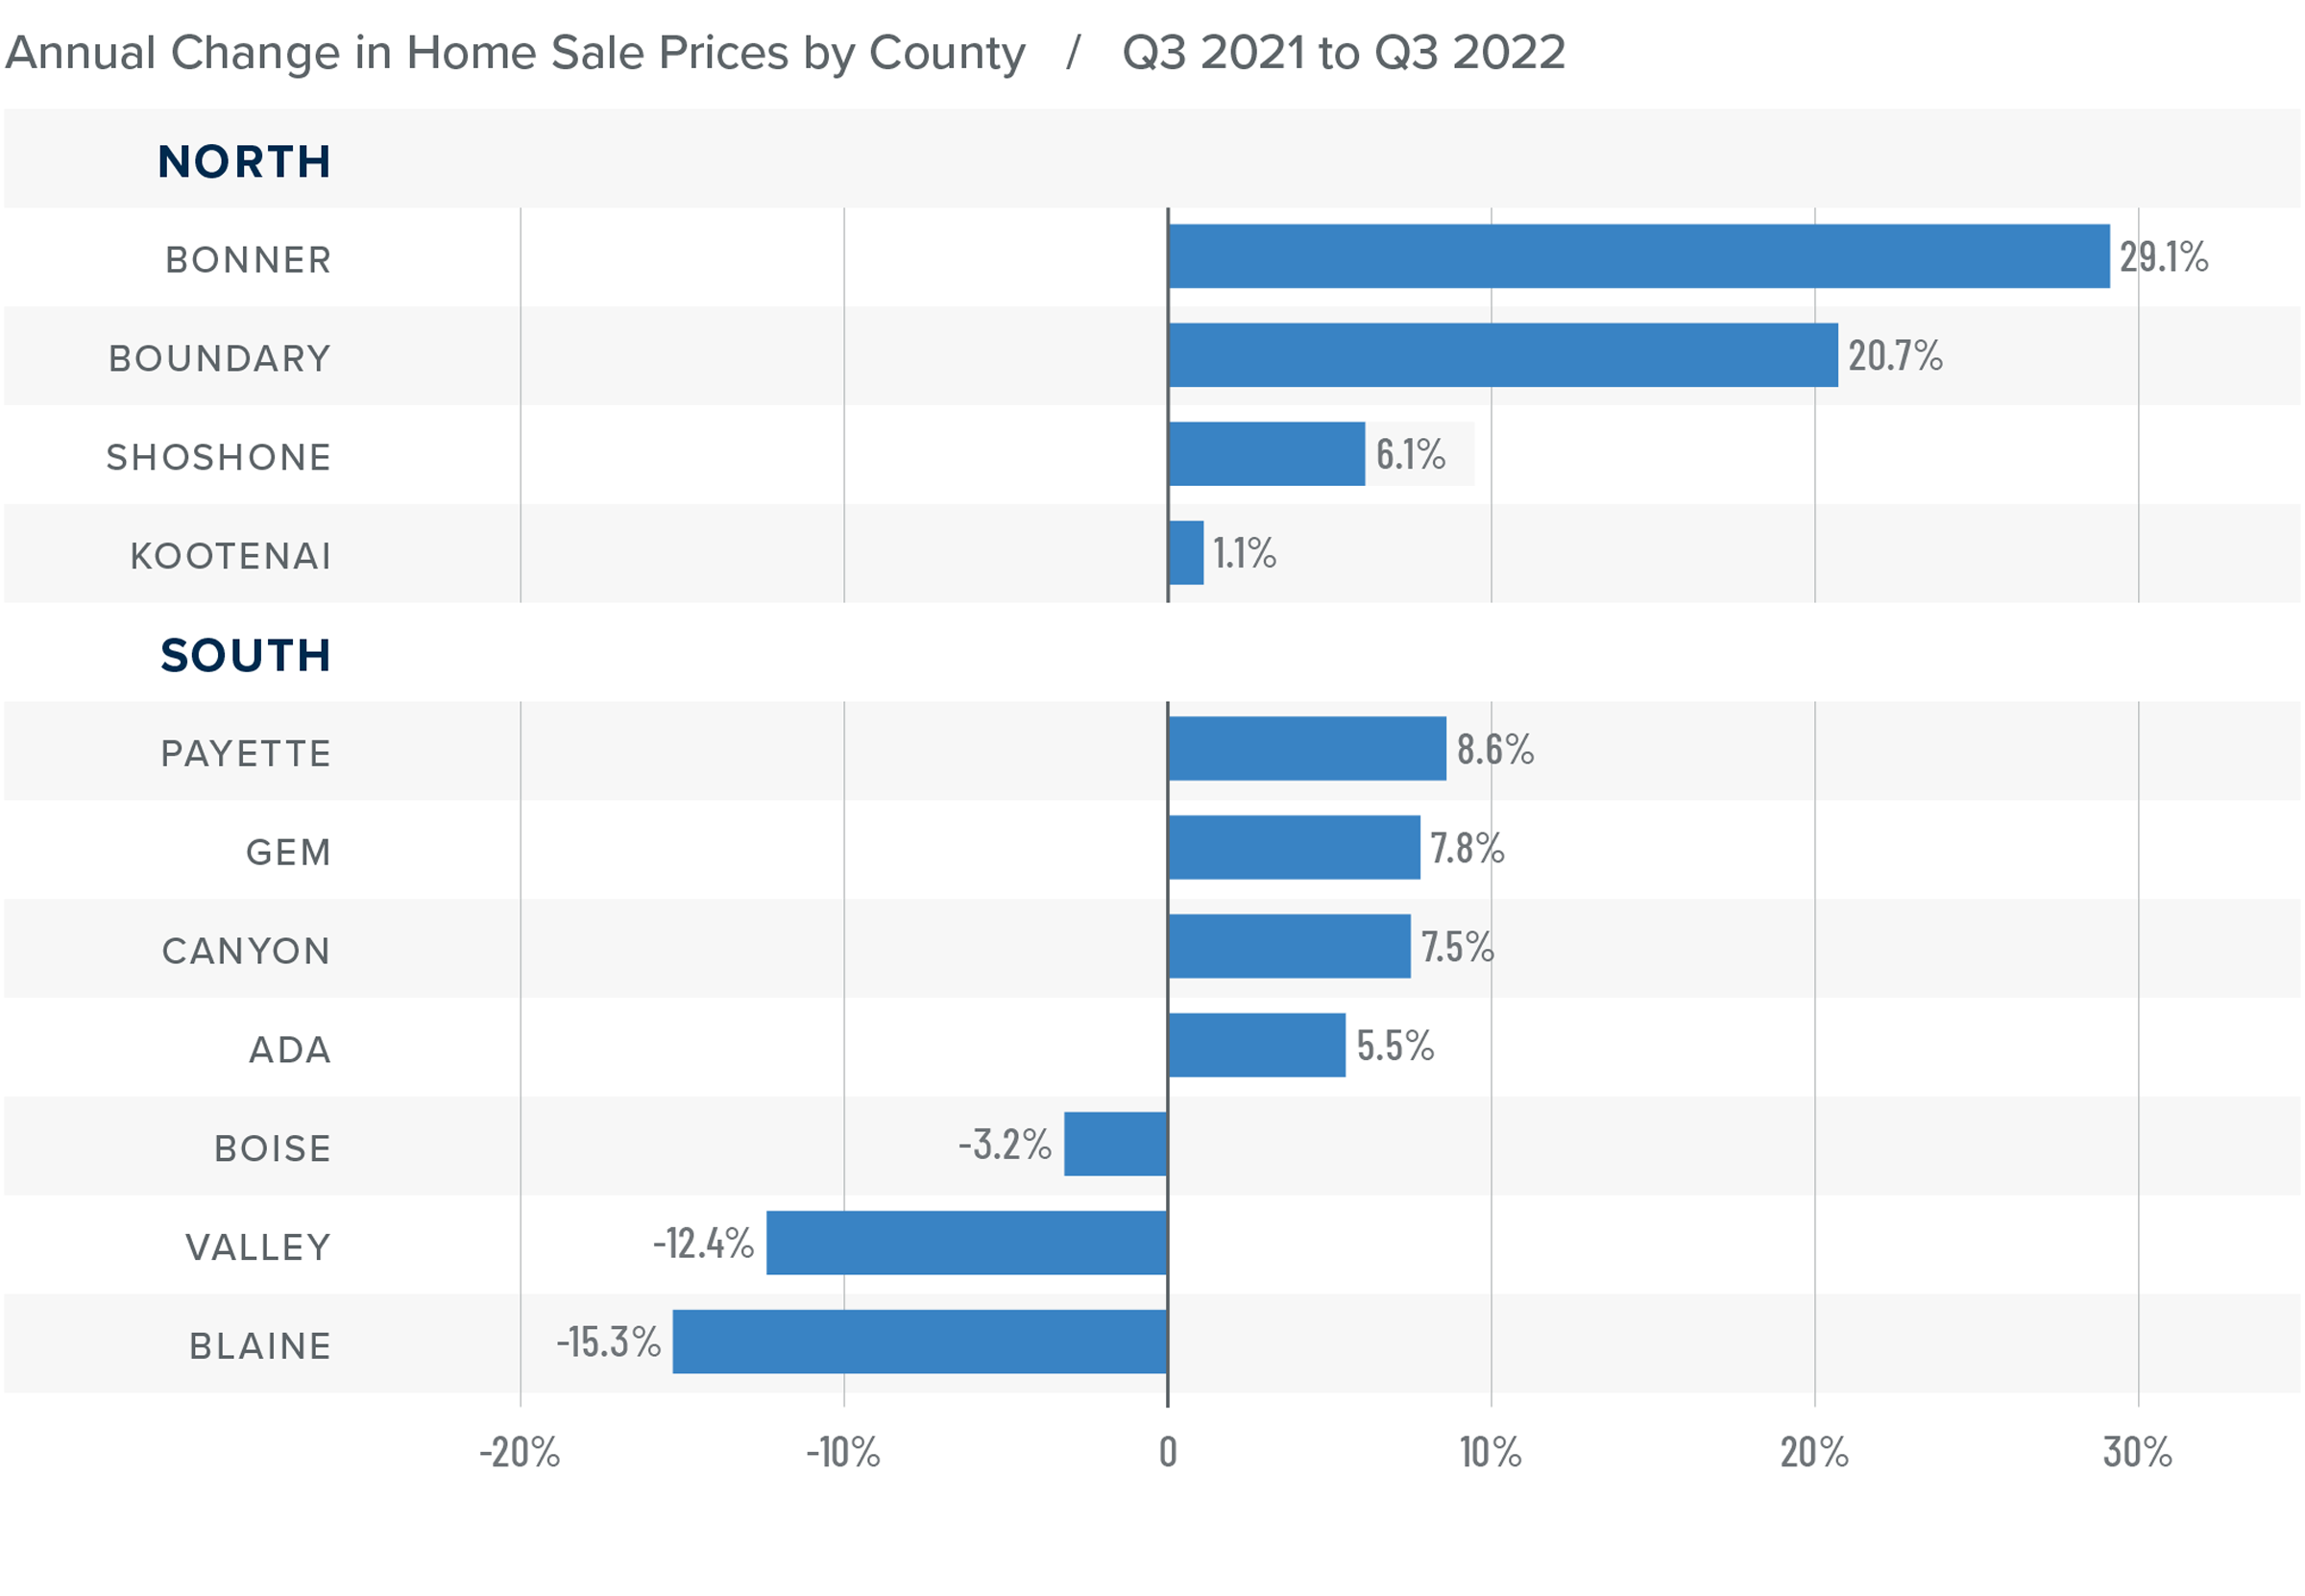 A bar graph showing the annual change in home sale prices for various counties in North and South Idaho from Q3 2021 to Q3 2022. In the north, Bonner County tops the list at 29.1%, followed by Boundary at 20.7%, Shoshone at 6.1%, and Kootenai at 1.1%. In the South, Payette leads off at 8.6%, followed by Gem at 7.8%, Canyon at 7.5%, Ada 5.5%, Boise -3.2%, Valley -12.4%, and Blaine at -15.3%.